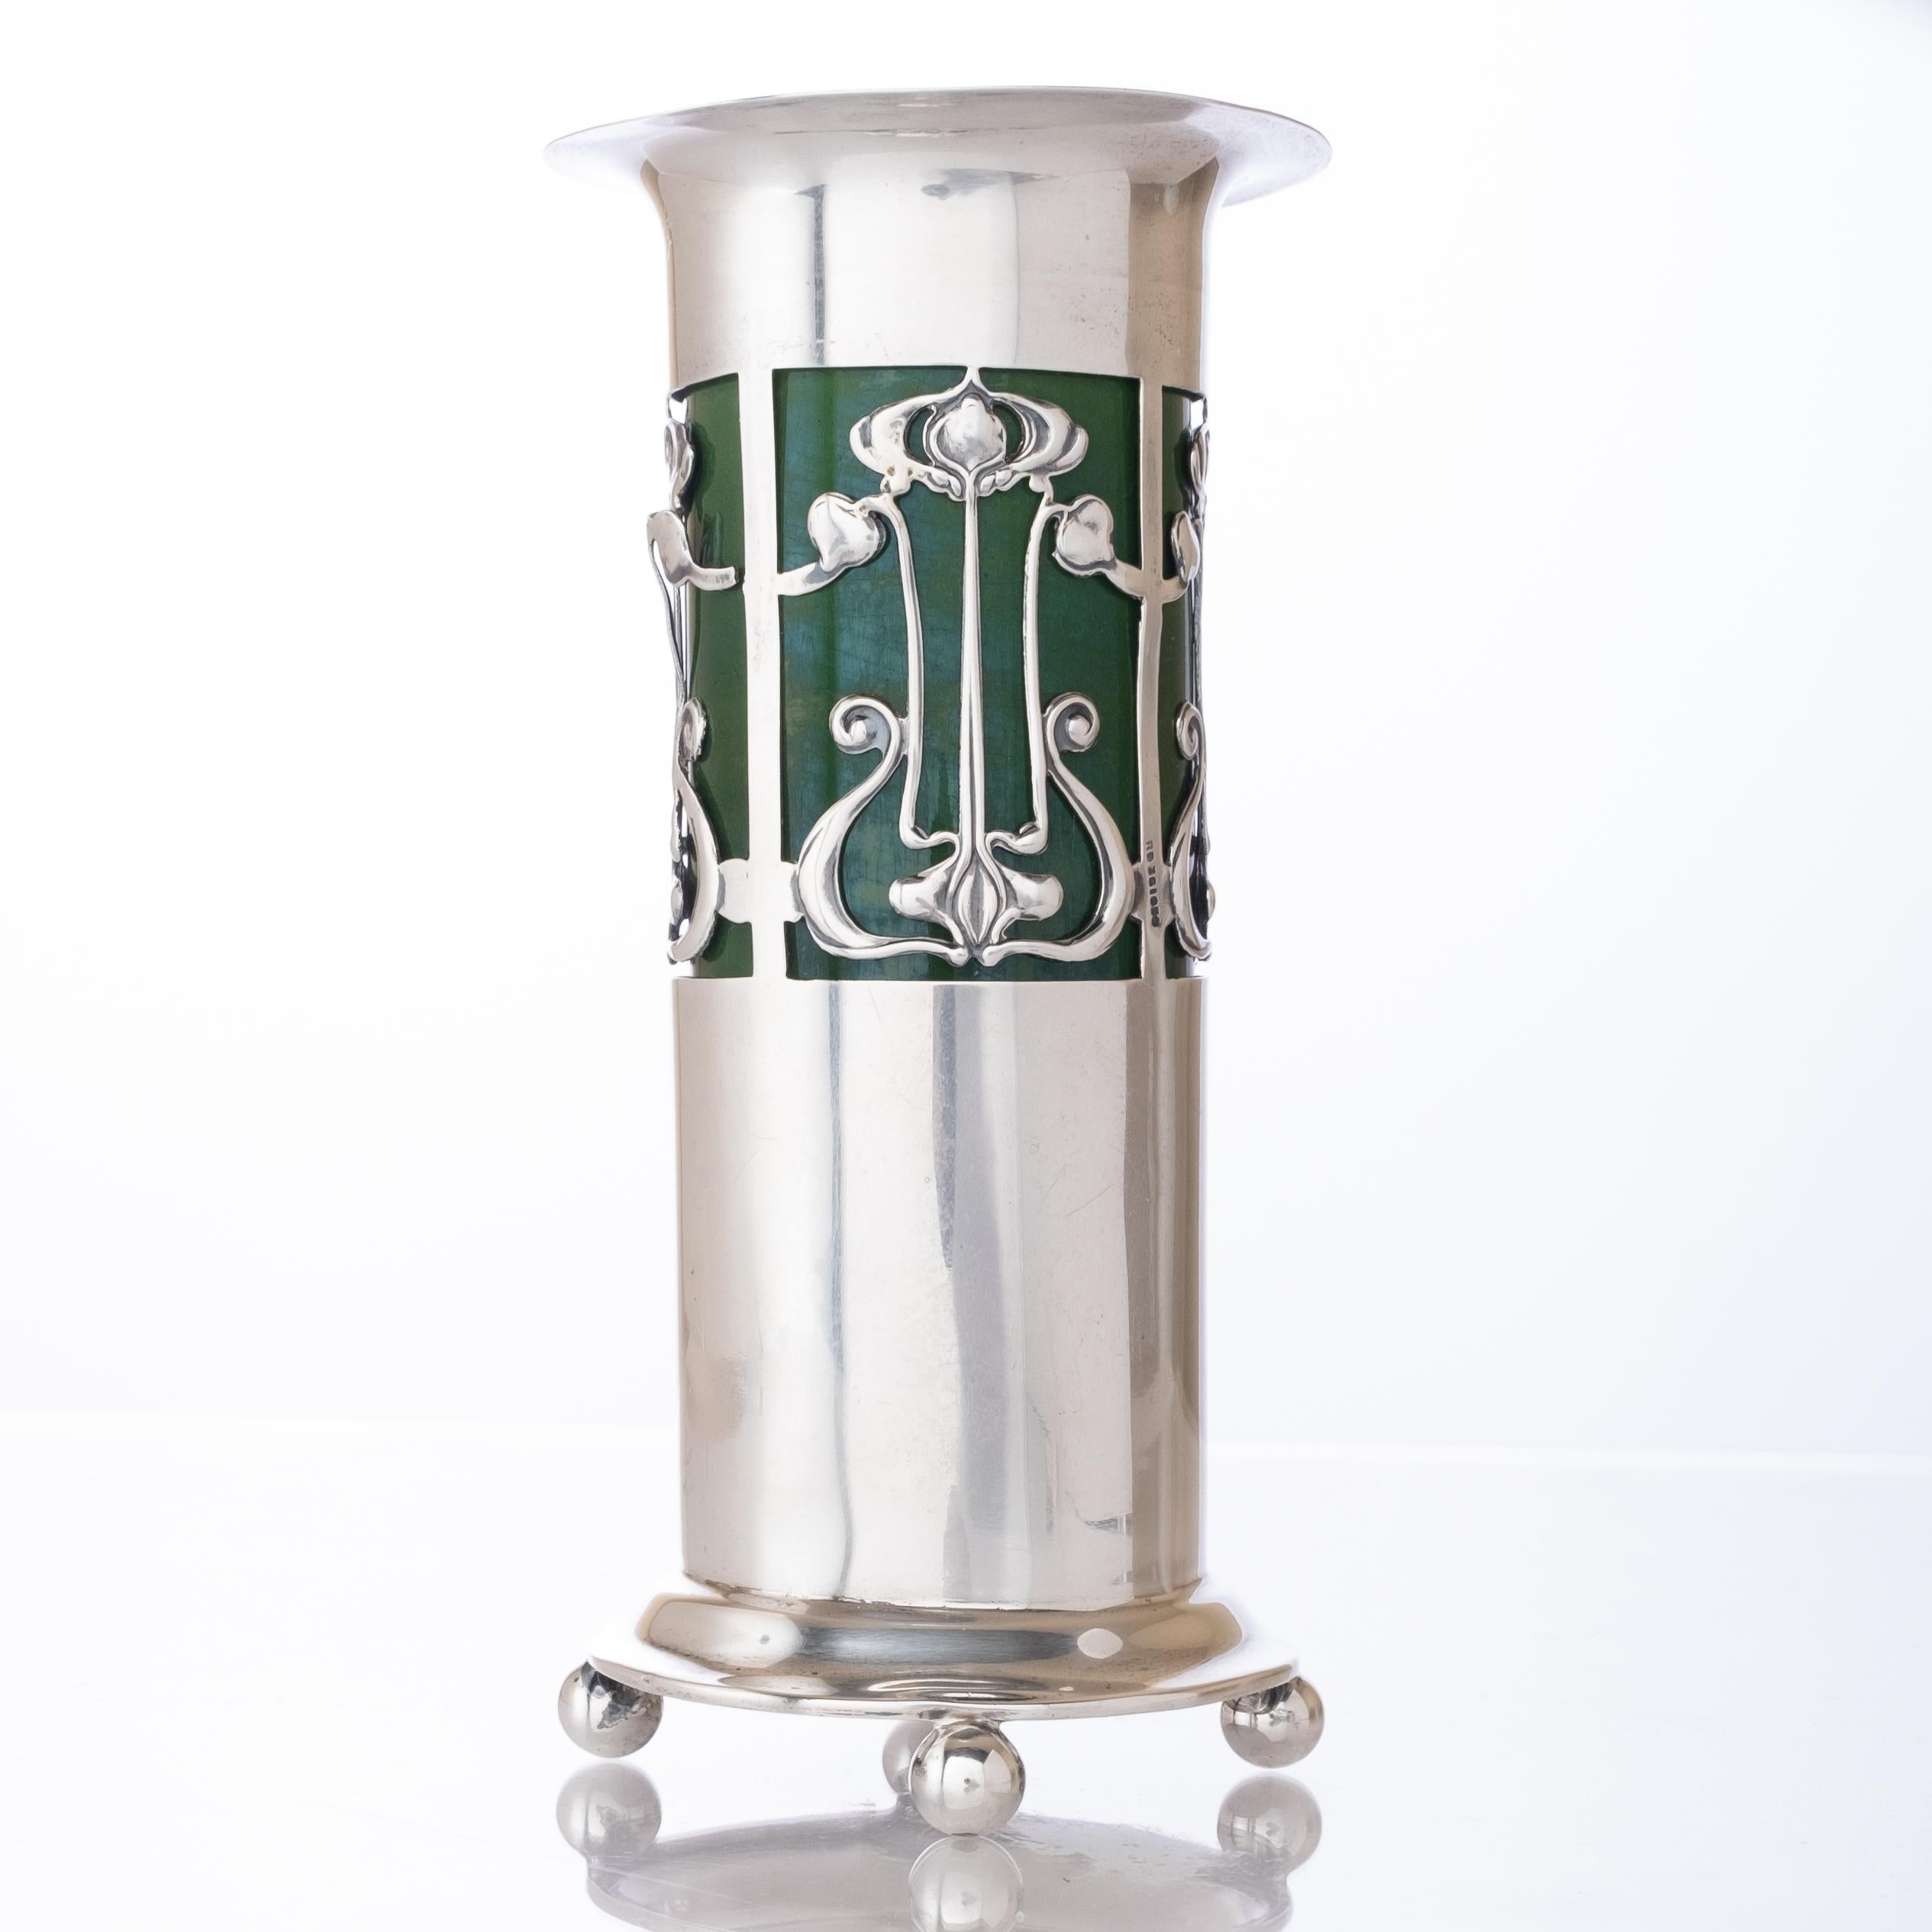 19th Century English Art Nouveau-Period, Roberts & Belk Sterling Silver Vase with Liner